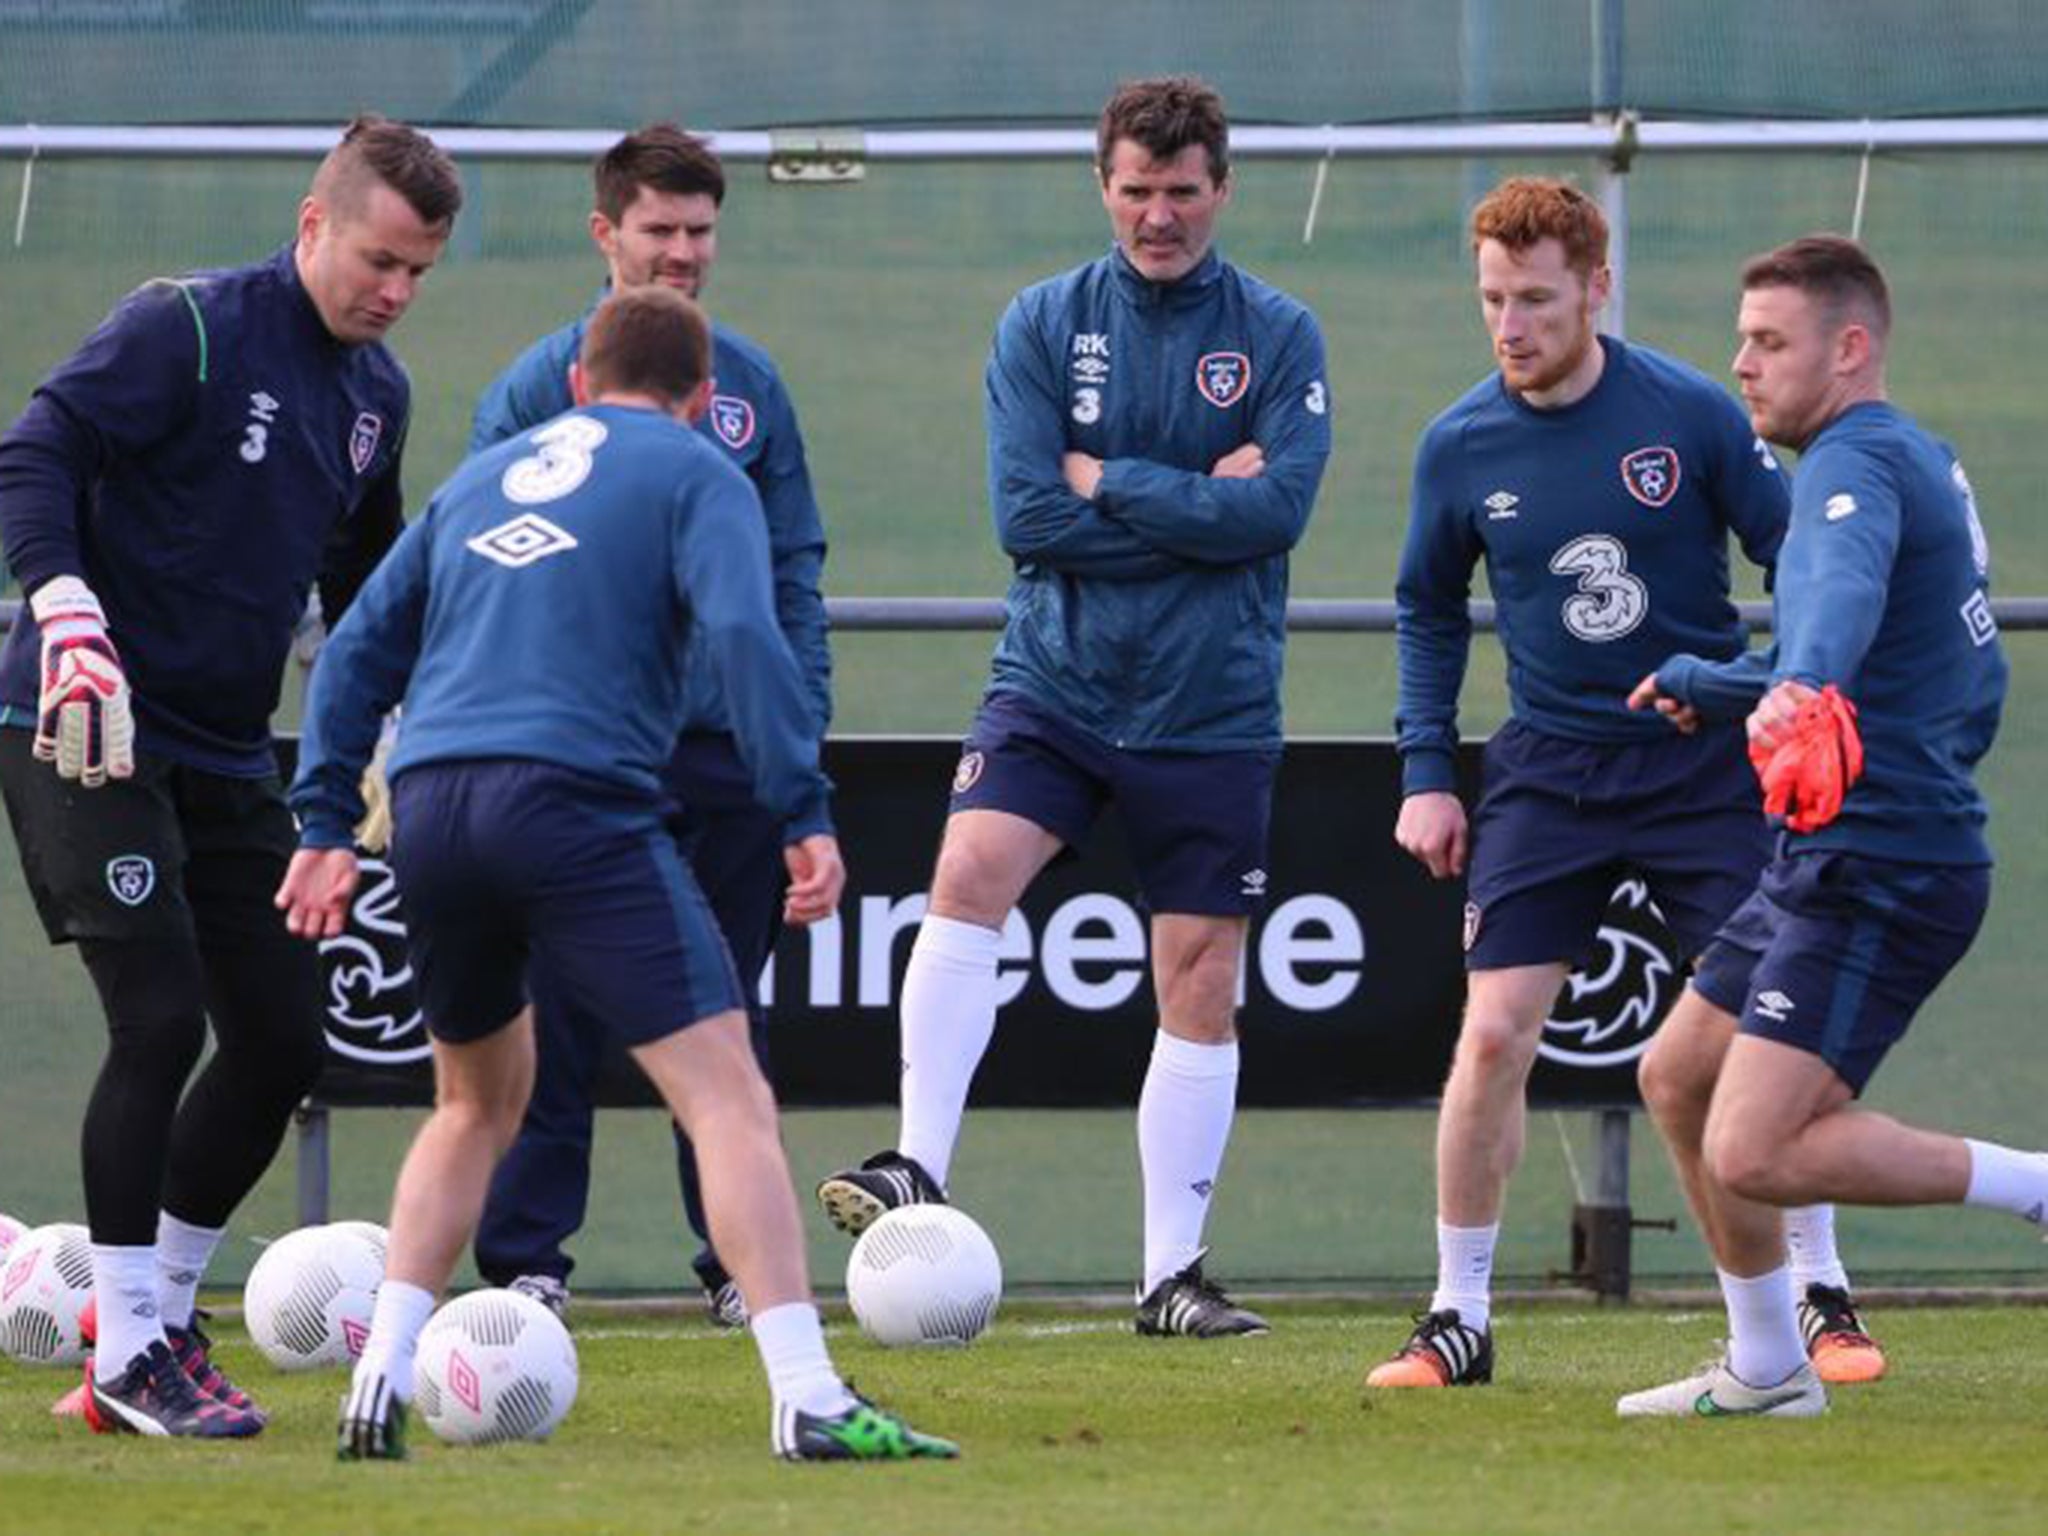 Roy Keane puts the Ireland players through their paces at training